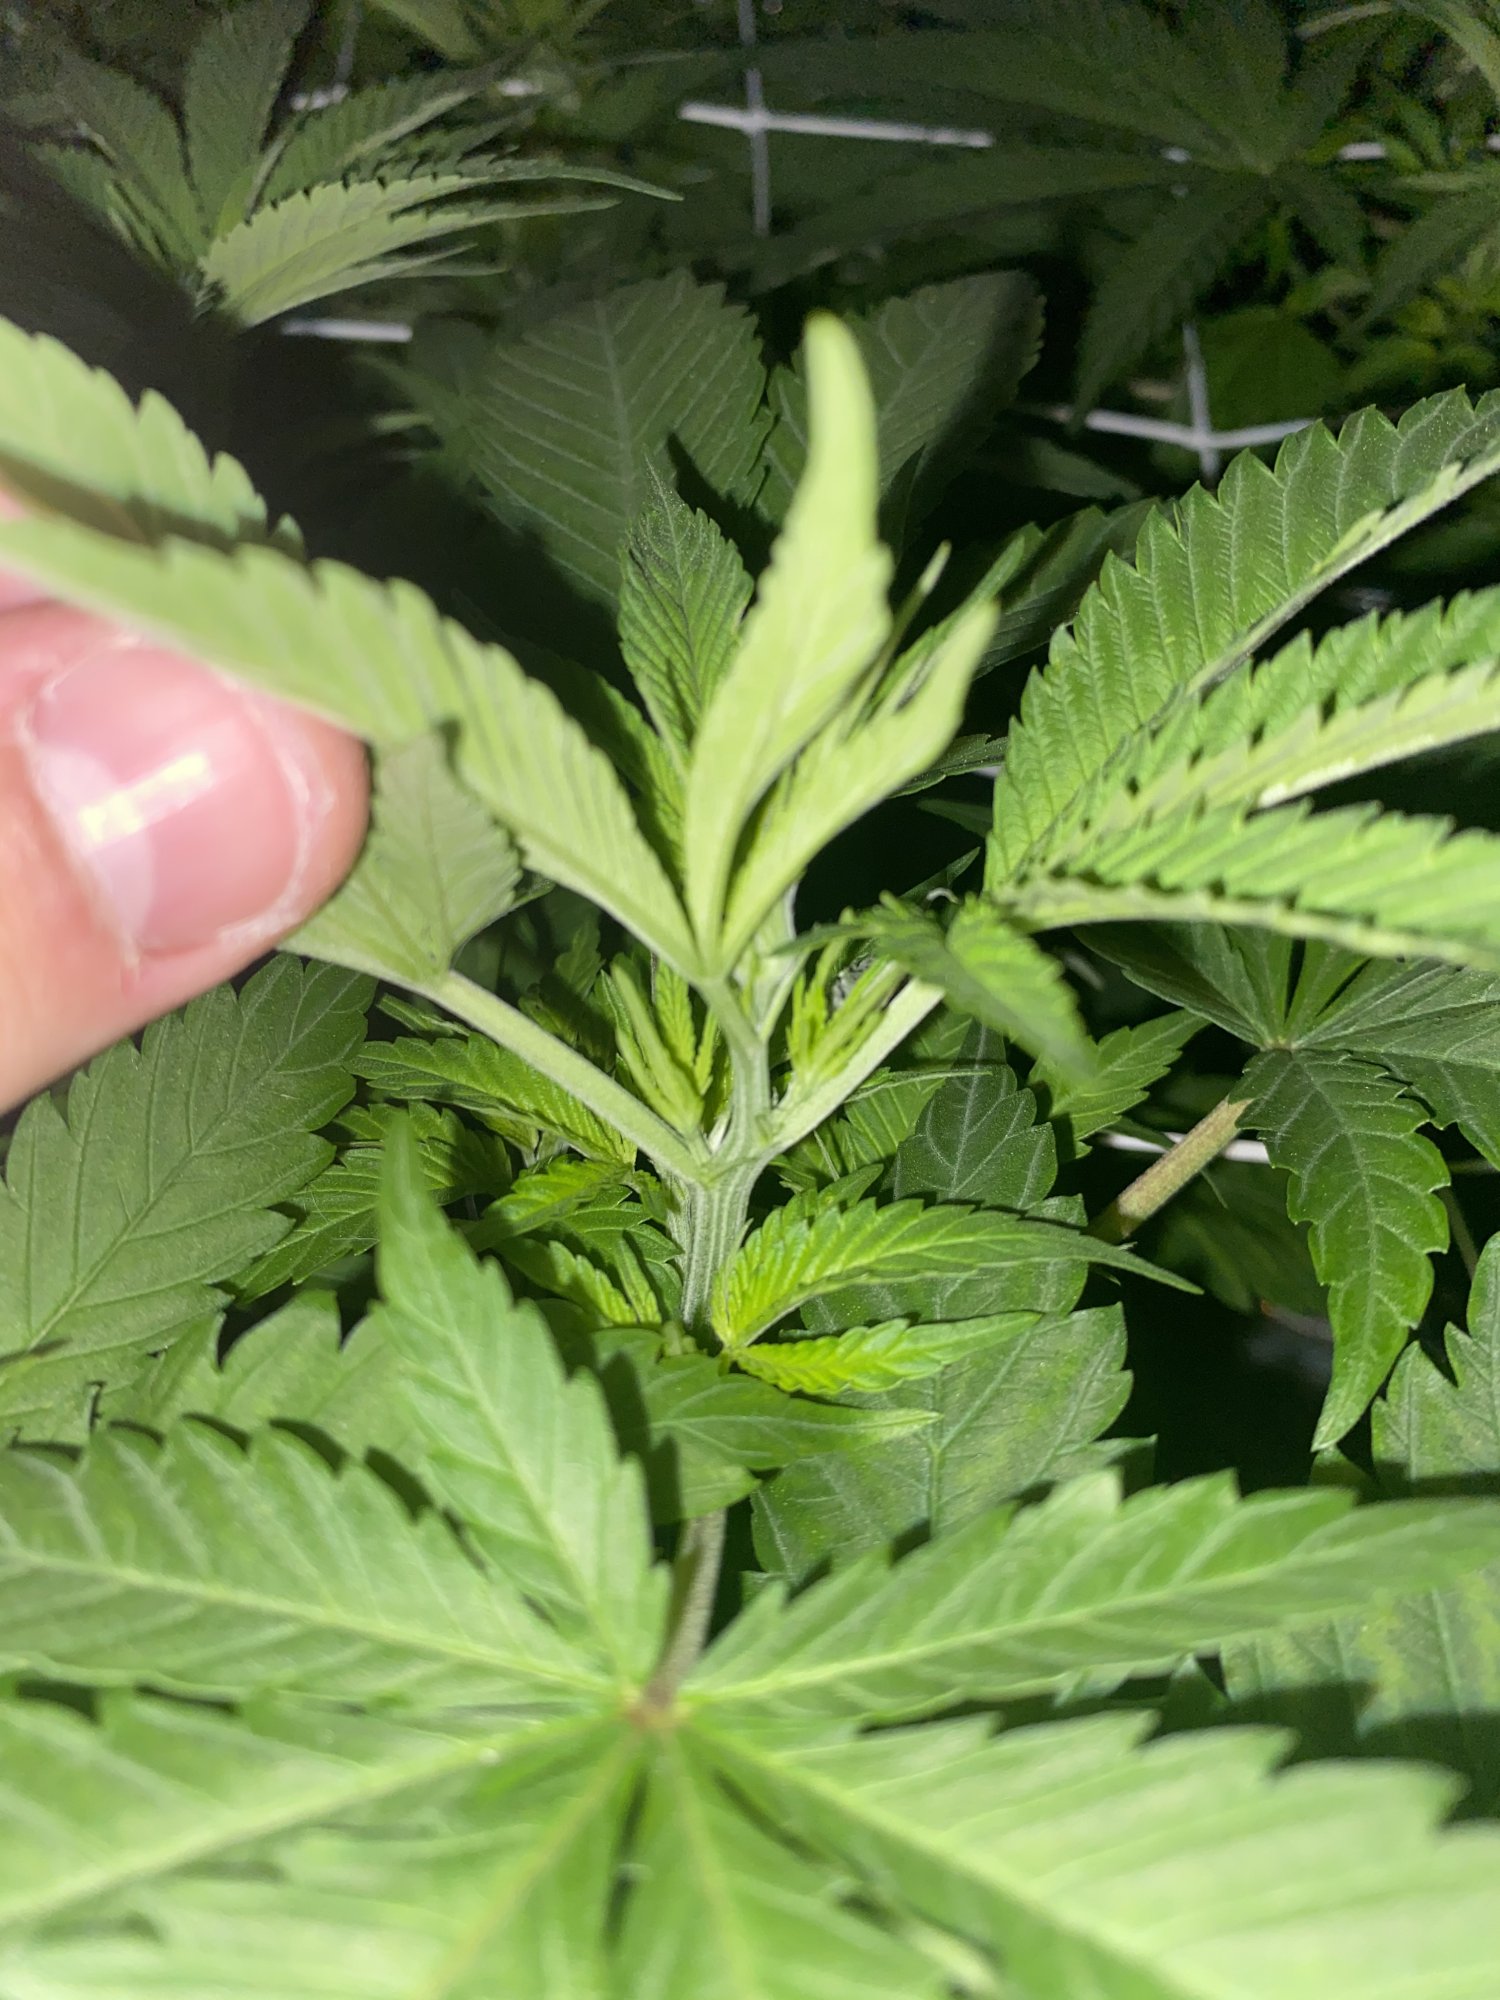 Are these pistils or leaves